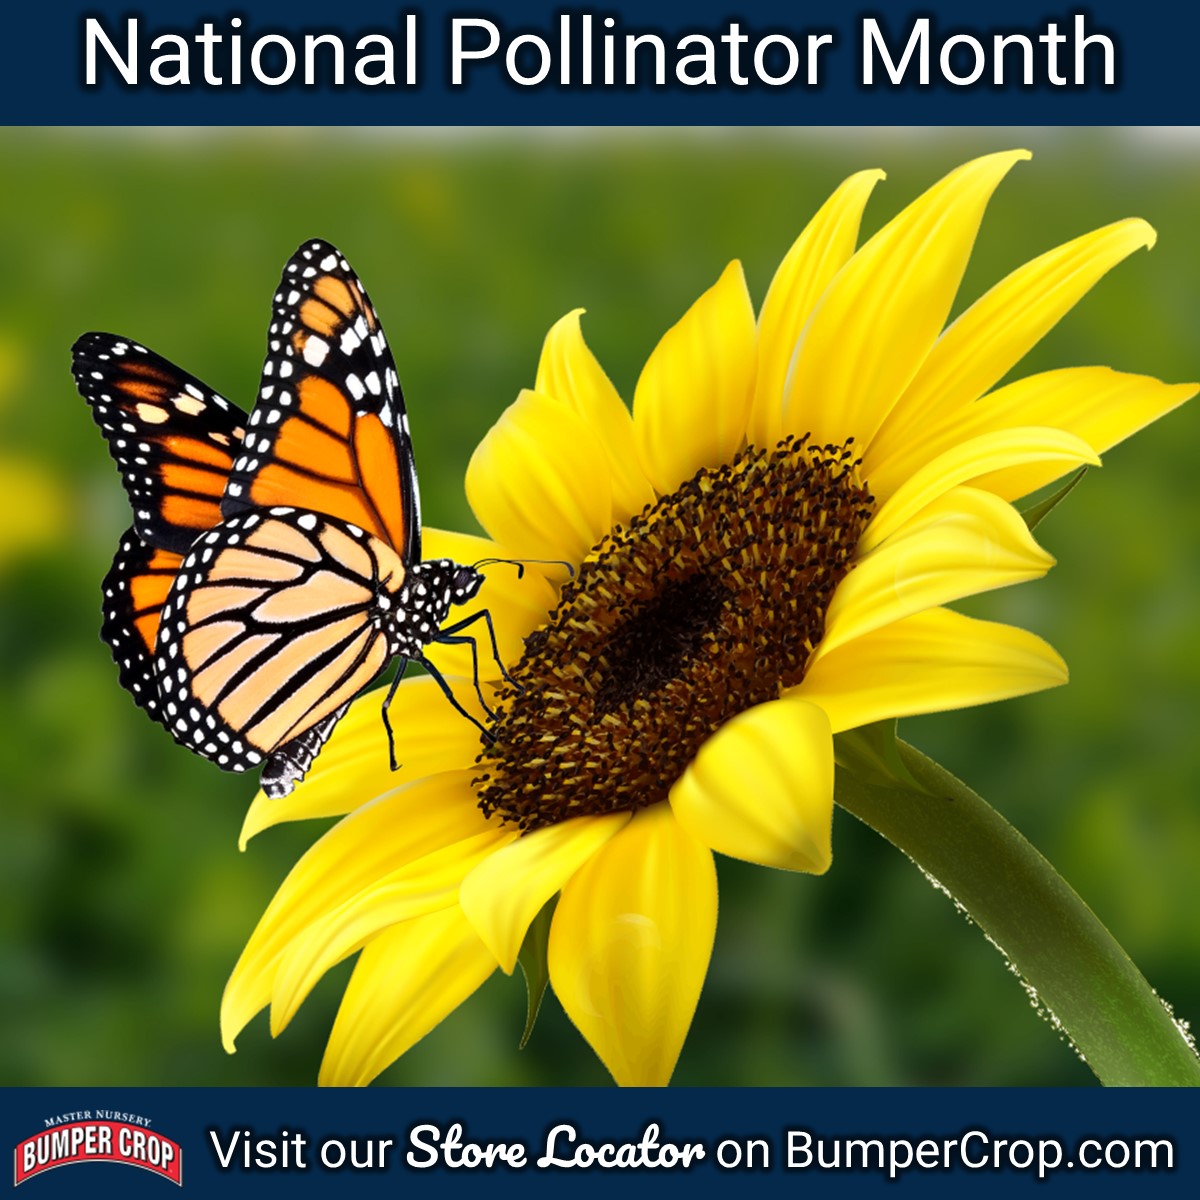 🦋 June is National Pollinator Month! 🦋 What will you 'bee' planting in your organic pollinator gardens? 🐝 bumpercrop.com/store-locator/ #June #PollinatorMonth #NationalPollinatorMonth #Gardens #PollinatorGardens #Pollinator #Pollinators #BumperCrop #Soils #PlantFoods #Organic